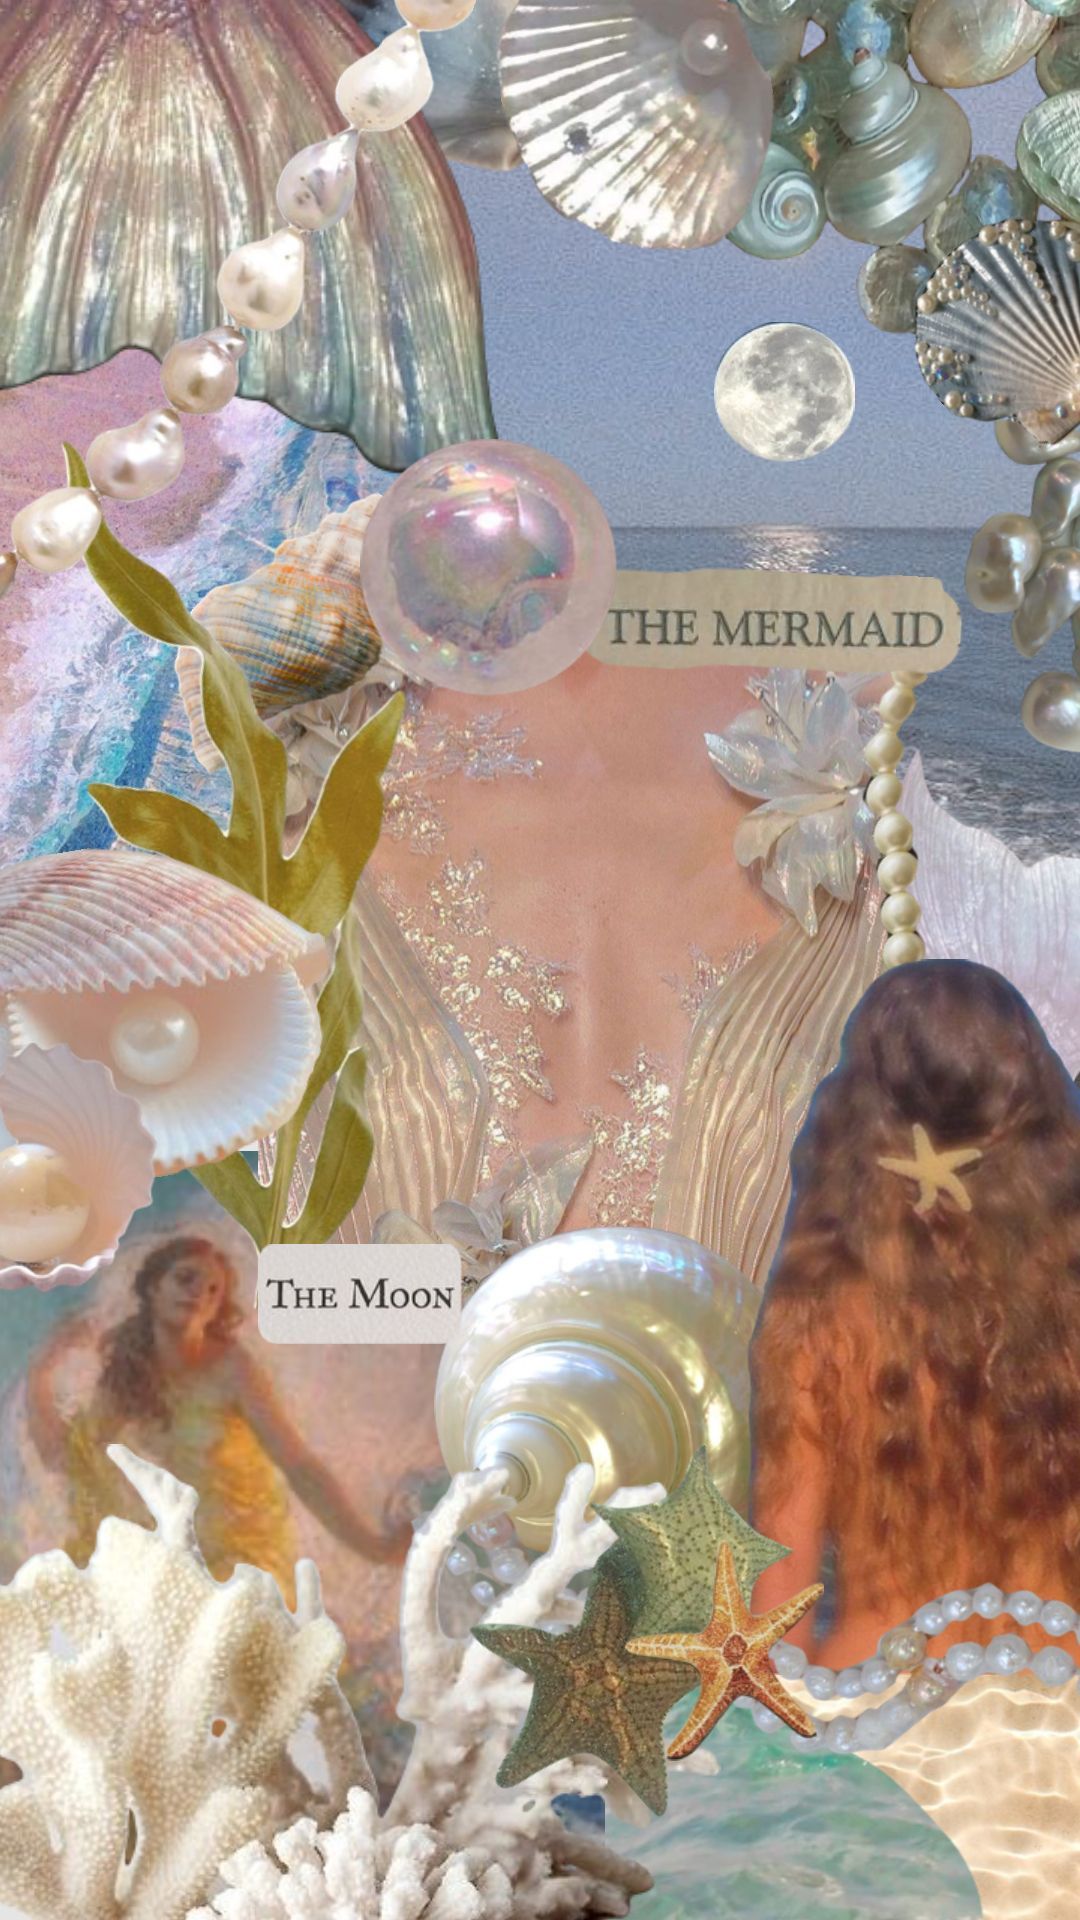 Collage of a mermaid with shells, starfish, and a moon - Mermaid